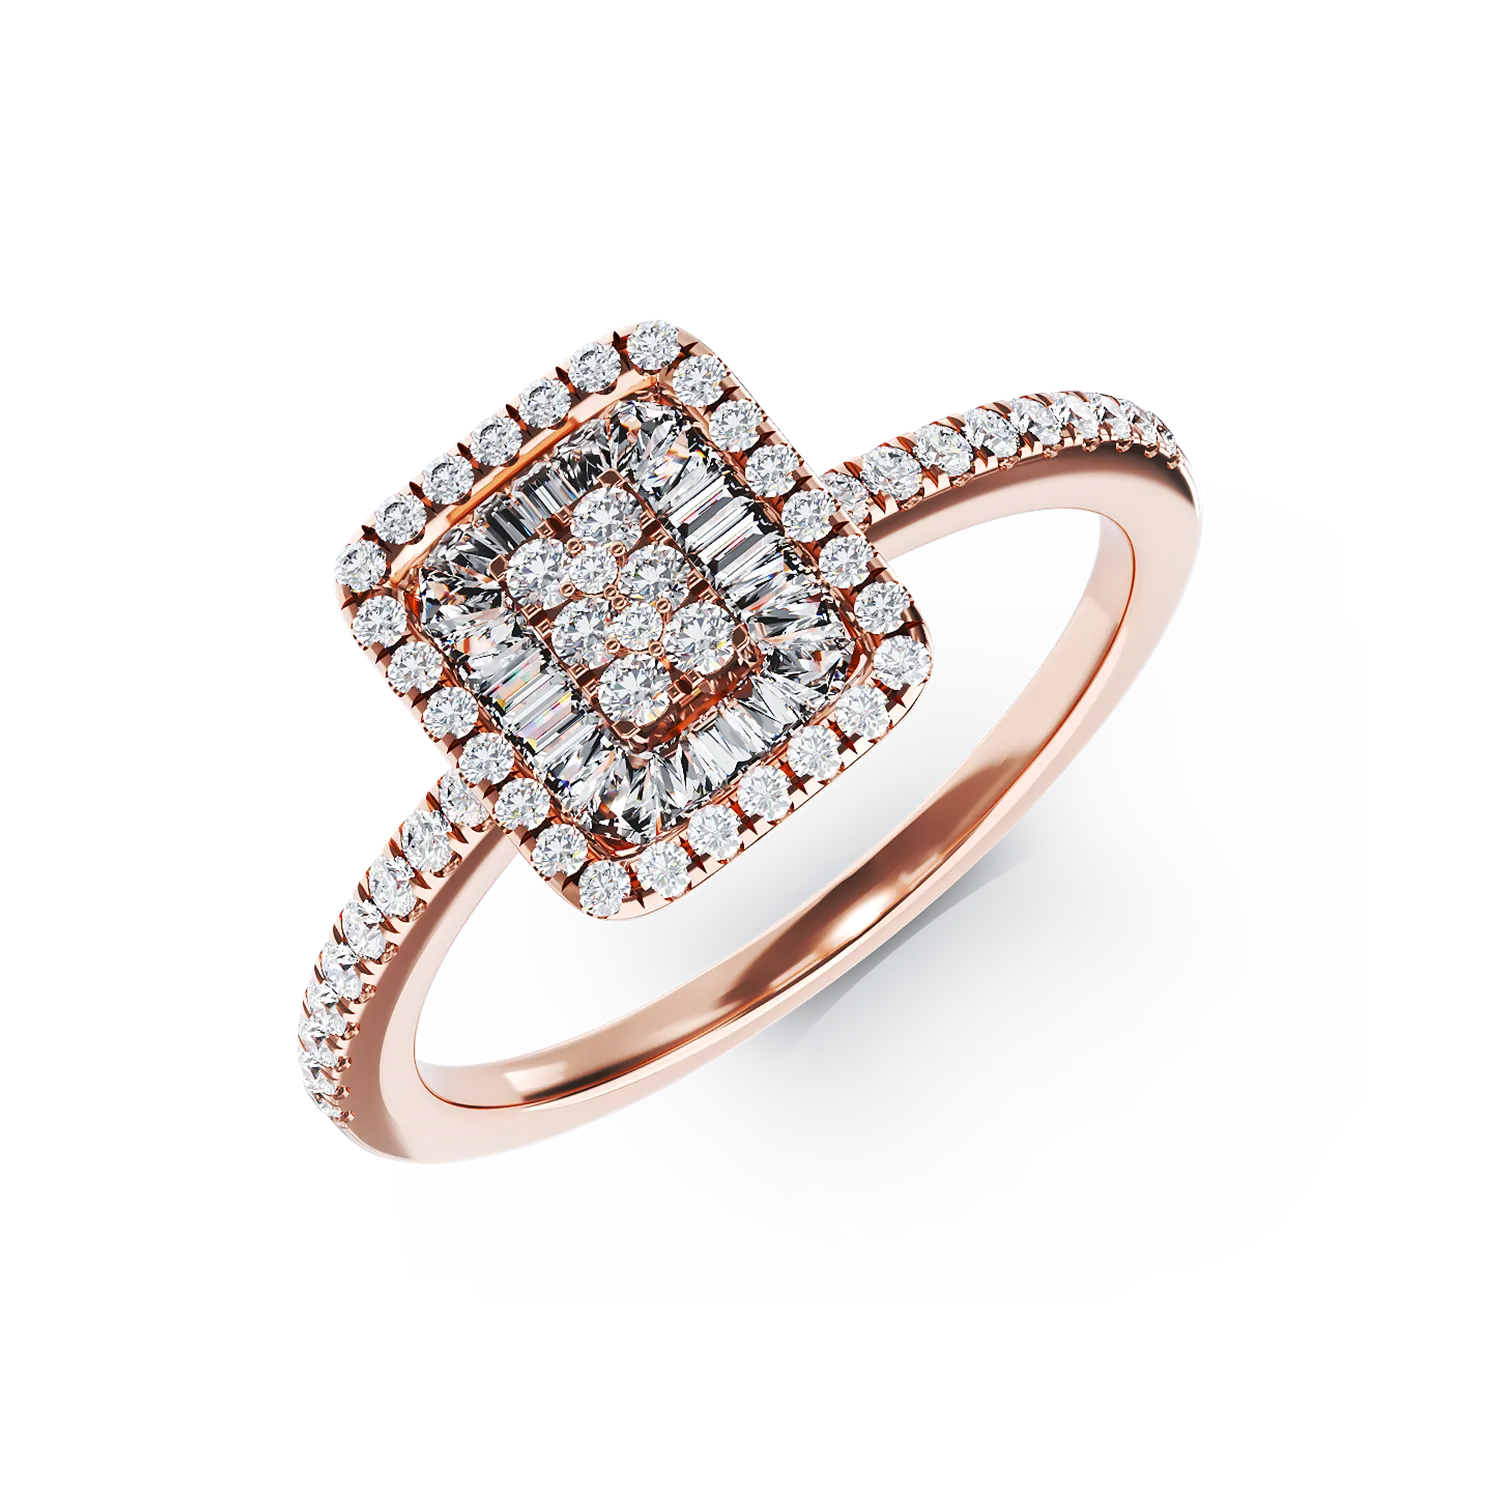 18K rose gold engagement ring with 0.27ct diamonds